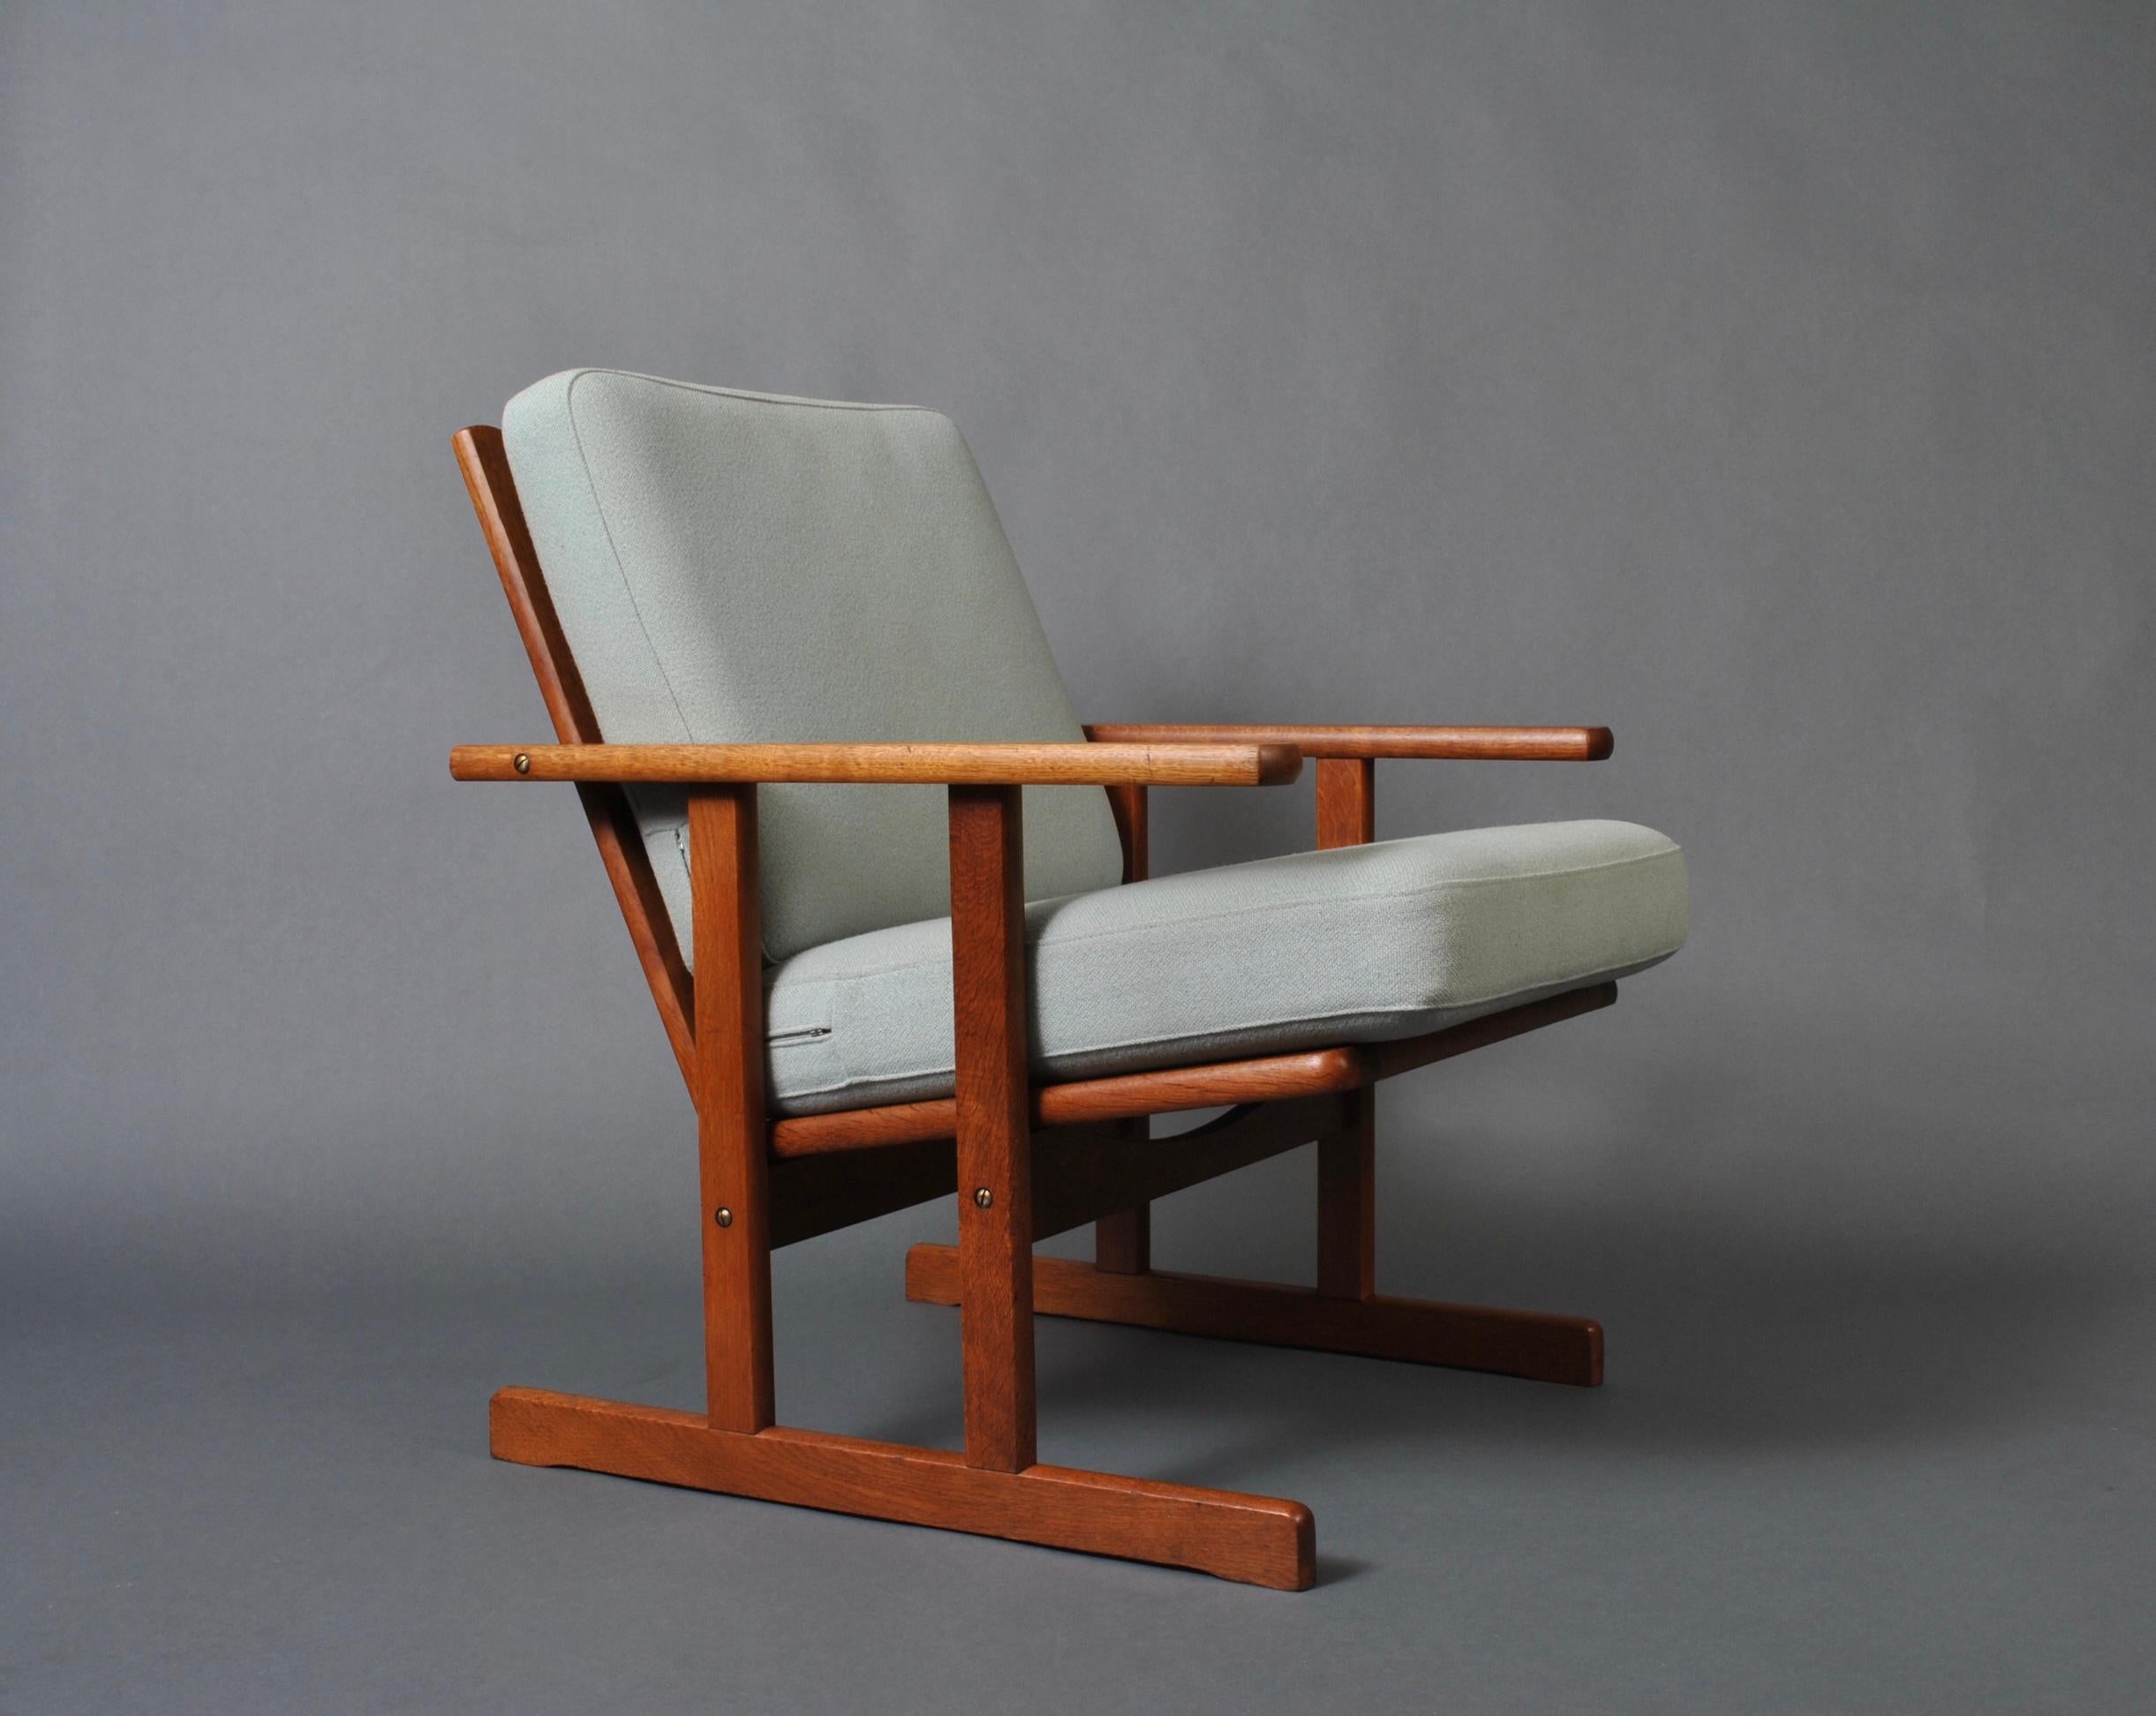 An early production oak armchair designed by Jørgen Baekmark for FDB Møbler. Produced by FDB, circa 1950. Pure minimal Modernism in design with a serious nod to the Mission and Arts & Crafts ethos. A rare midcentury easy chair.
Custom upholstery is